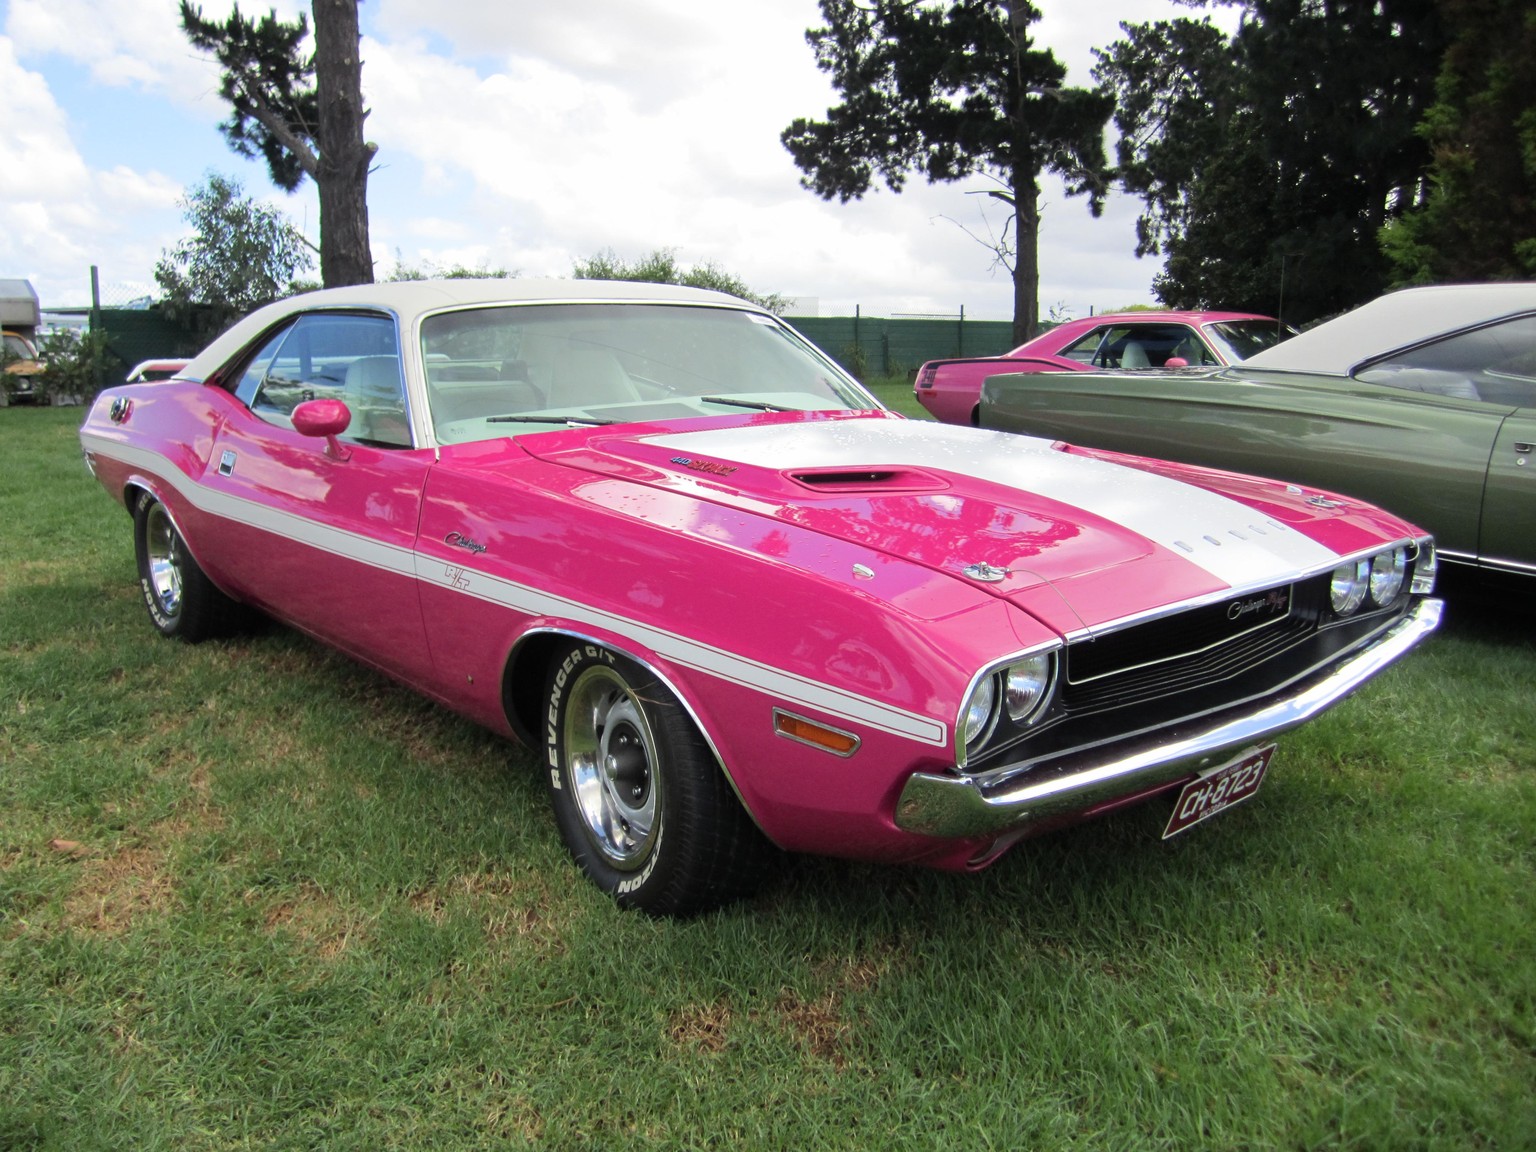 Panther Pink autofarbe Dodge Charger 1970 muscle car auto design https://commons.wikimedia.org/wiki/File:1970_Dodge_Challenger_RT_440_(2).jpg